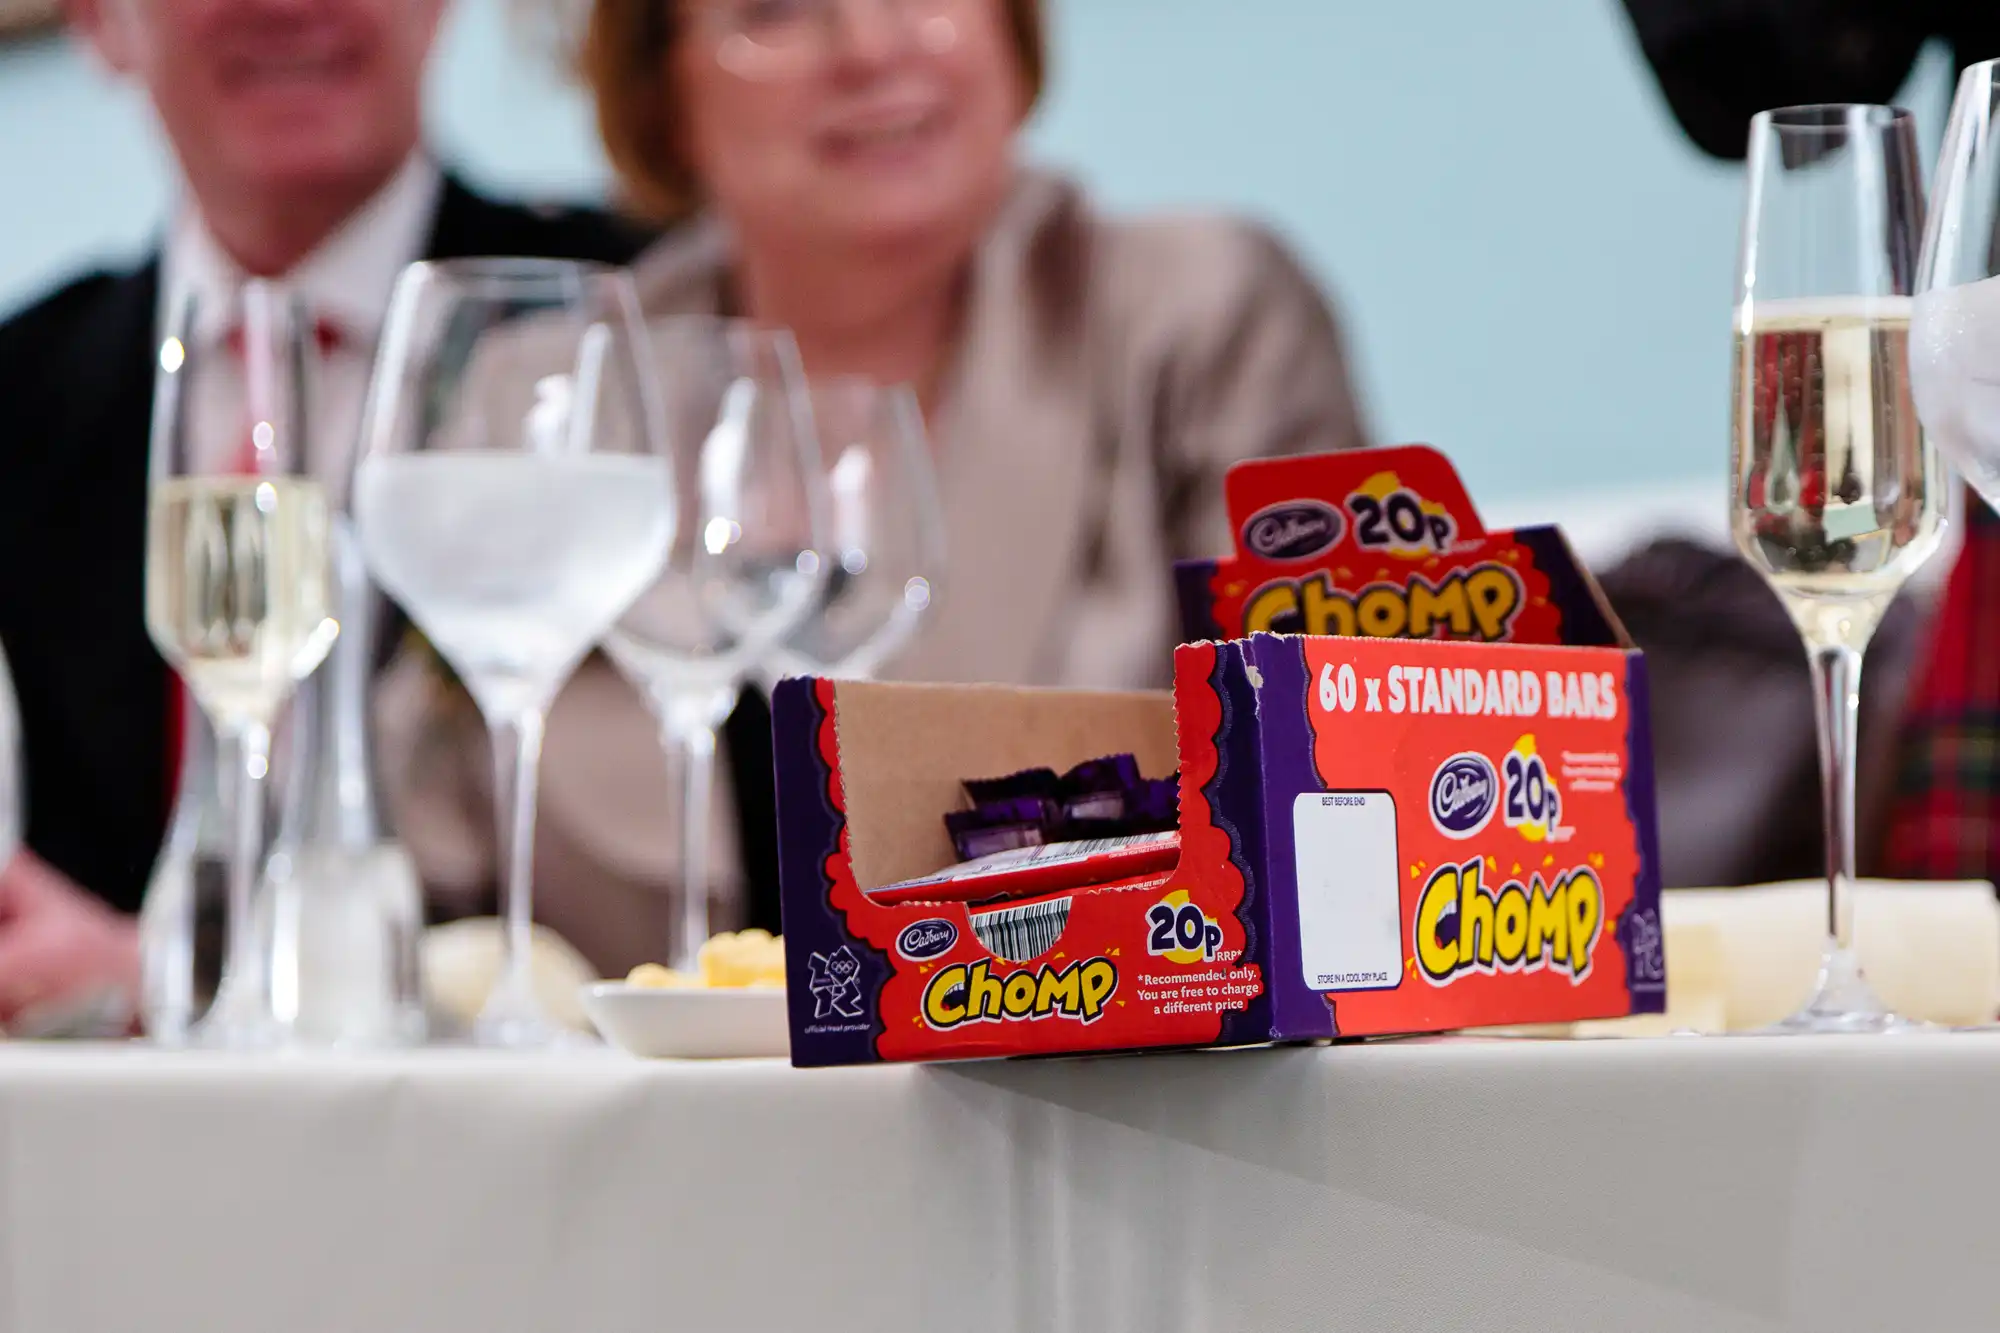 A box of cadbury chomp chocolate bars on a table at an event, with blurred guests and wine glasses in the background.